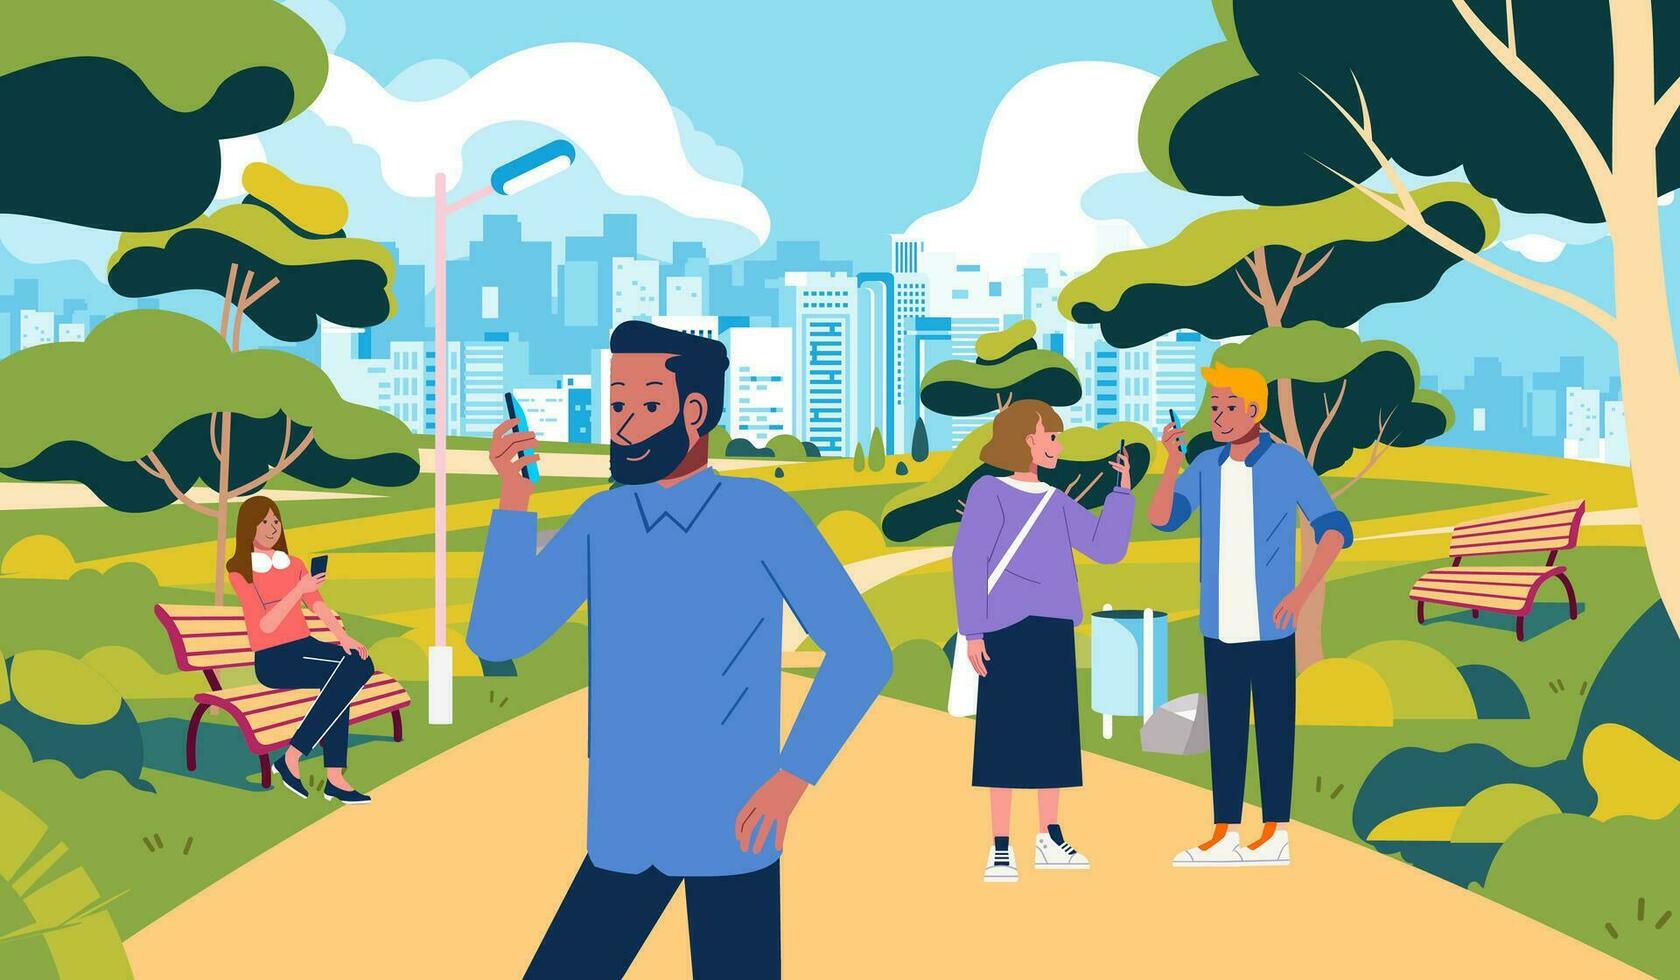 people hangout at park but busy with their own smartphone, park outdoor illustration with long chair, trees and city building in the background vector